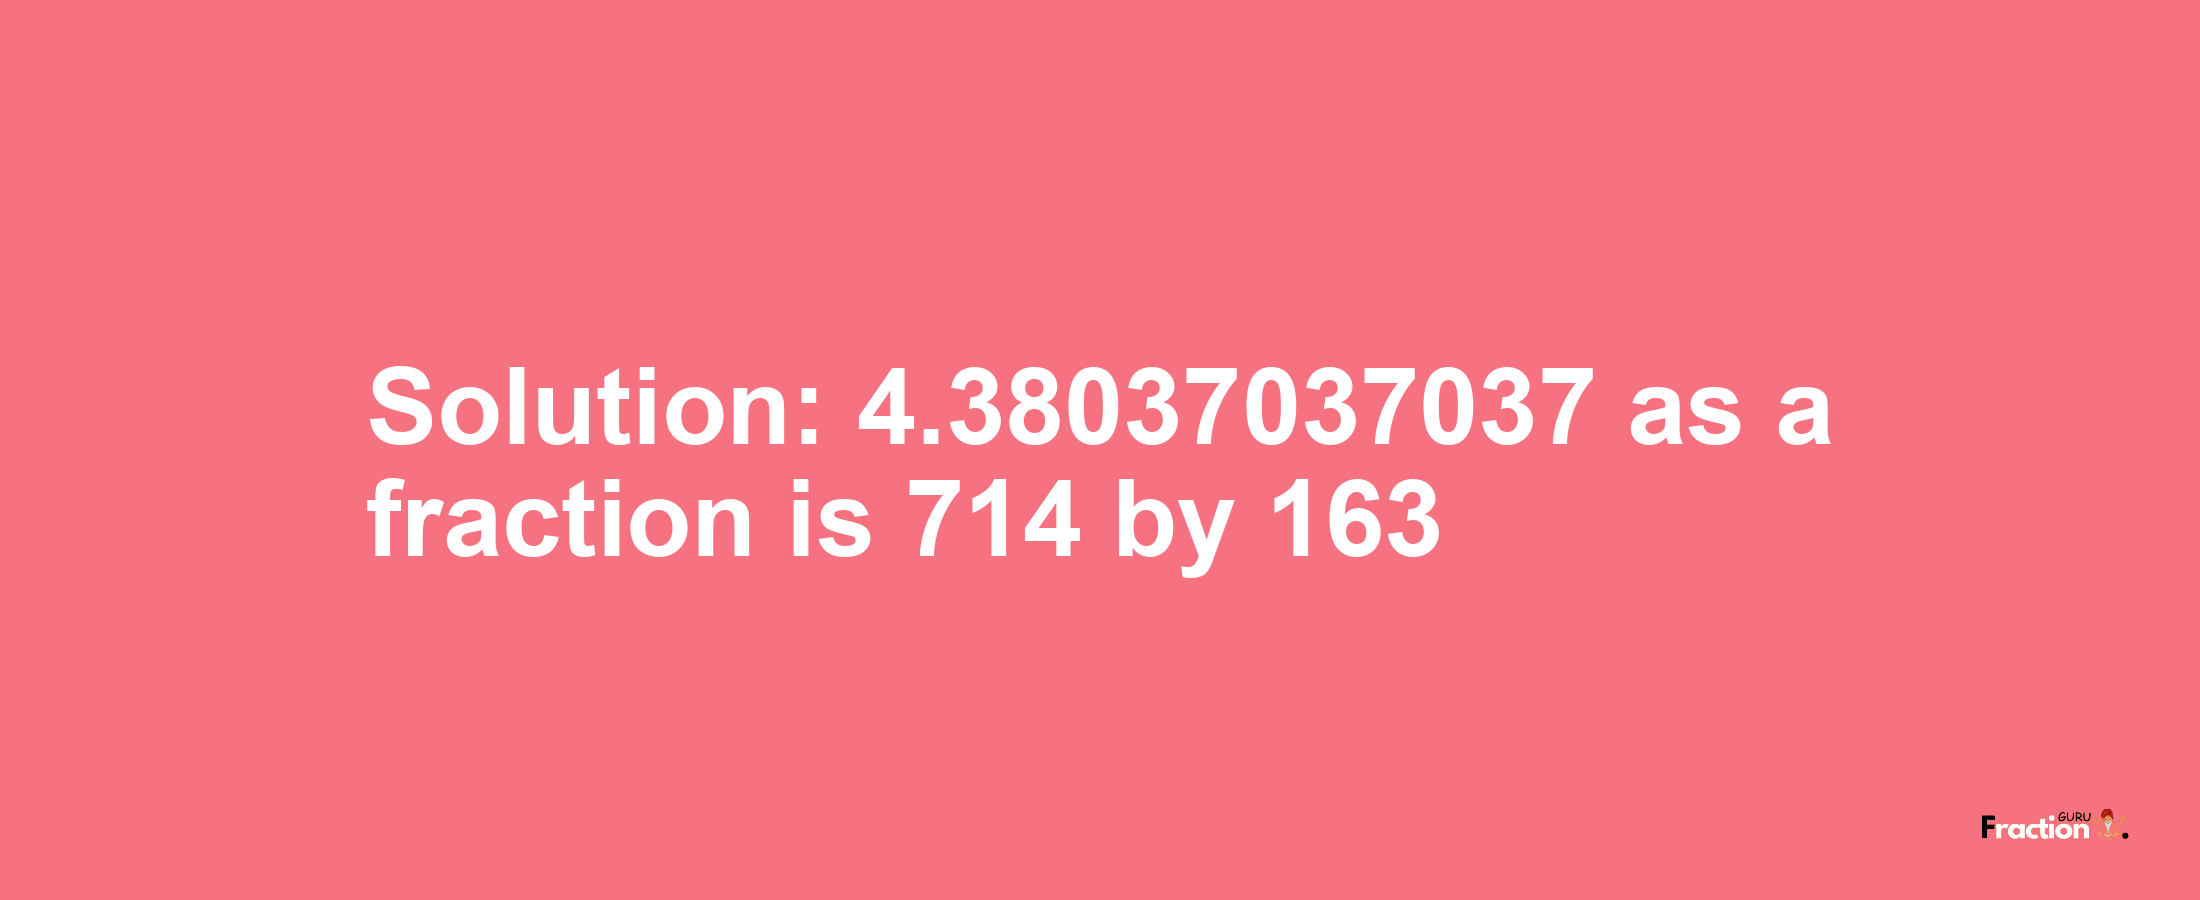 Solution:4.38037037037 as a fraction is 714/163